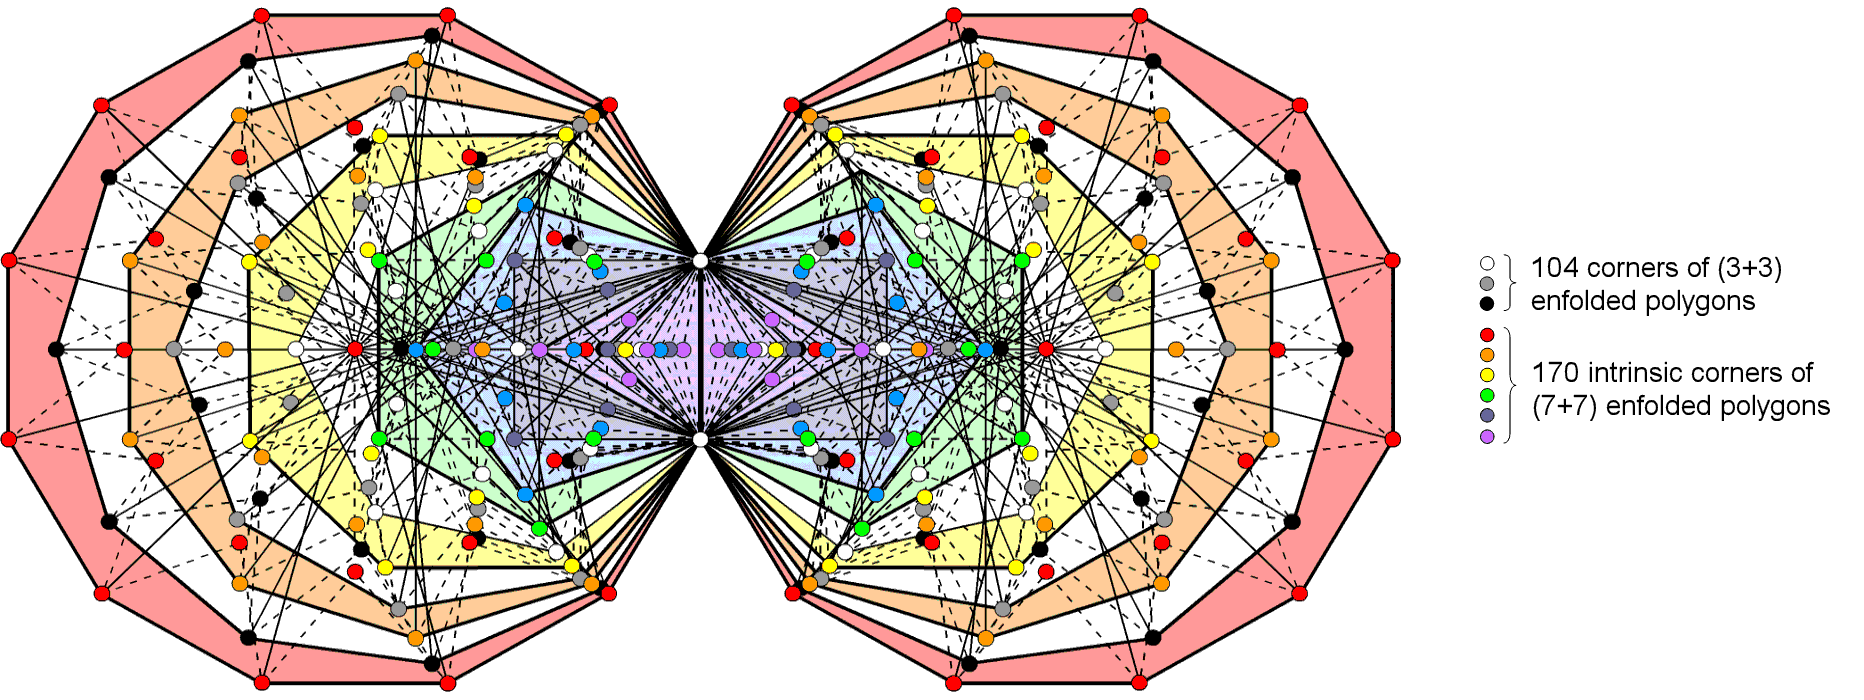 (137+137) intrinsic corners associated with the first (10+10) enfolded polygons